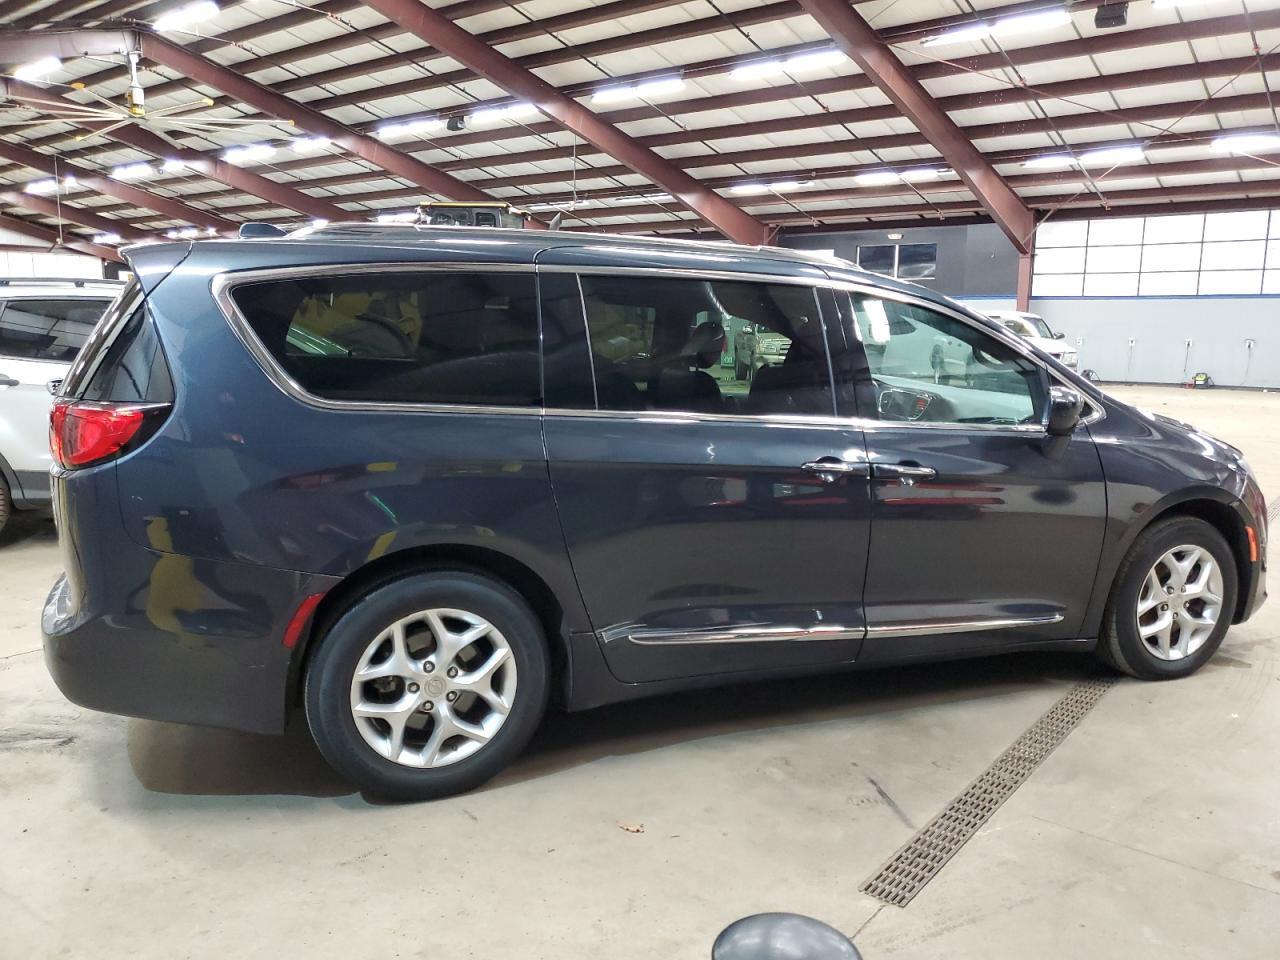 2020 CHRYSLER PACIFICA for Sale